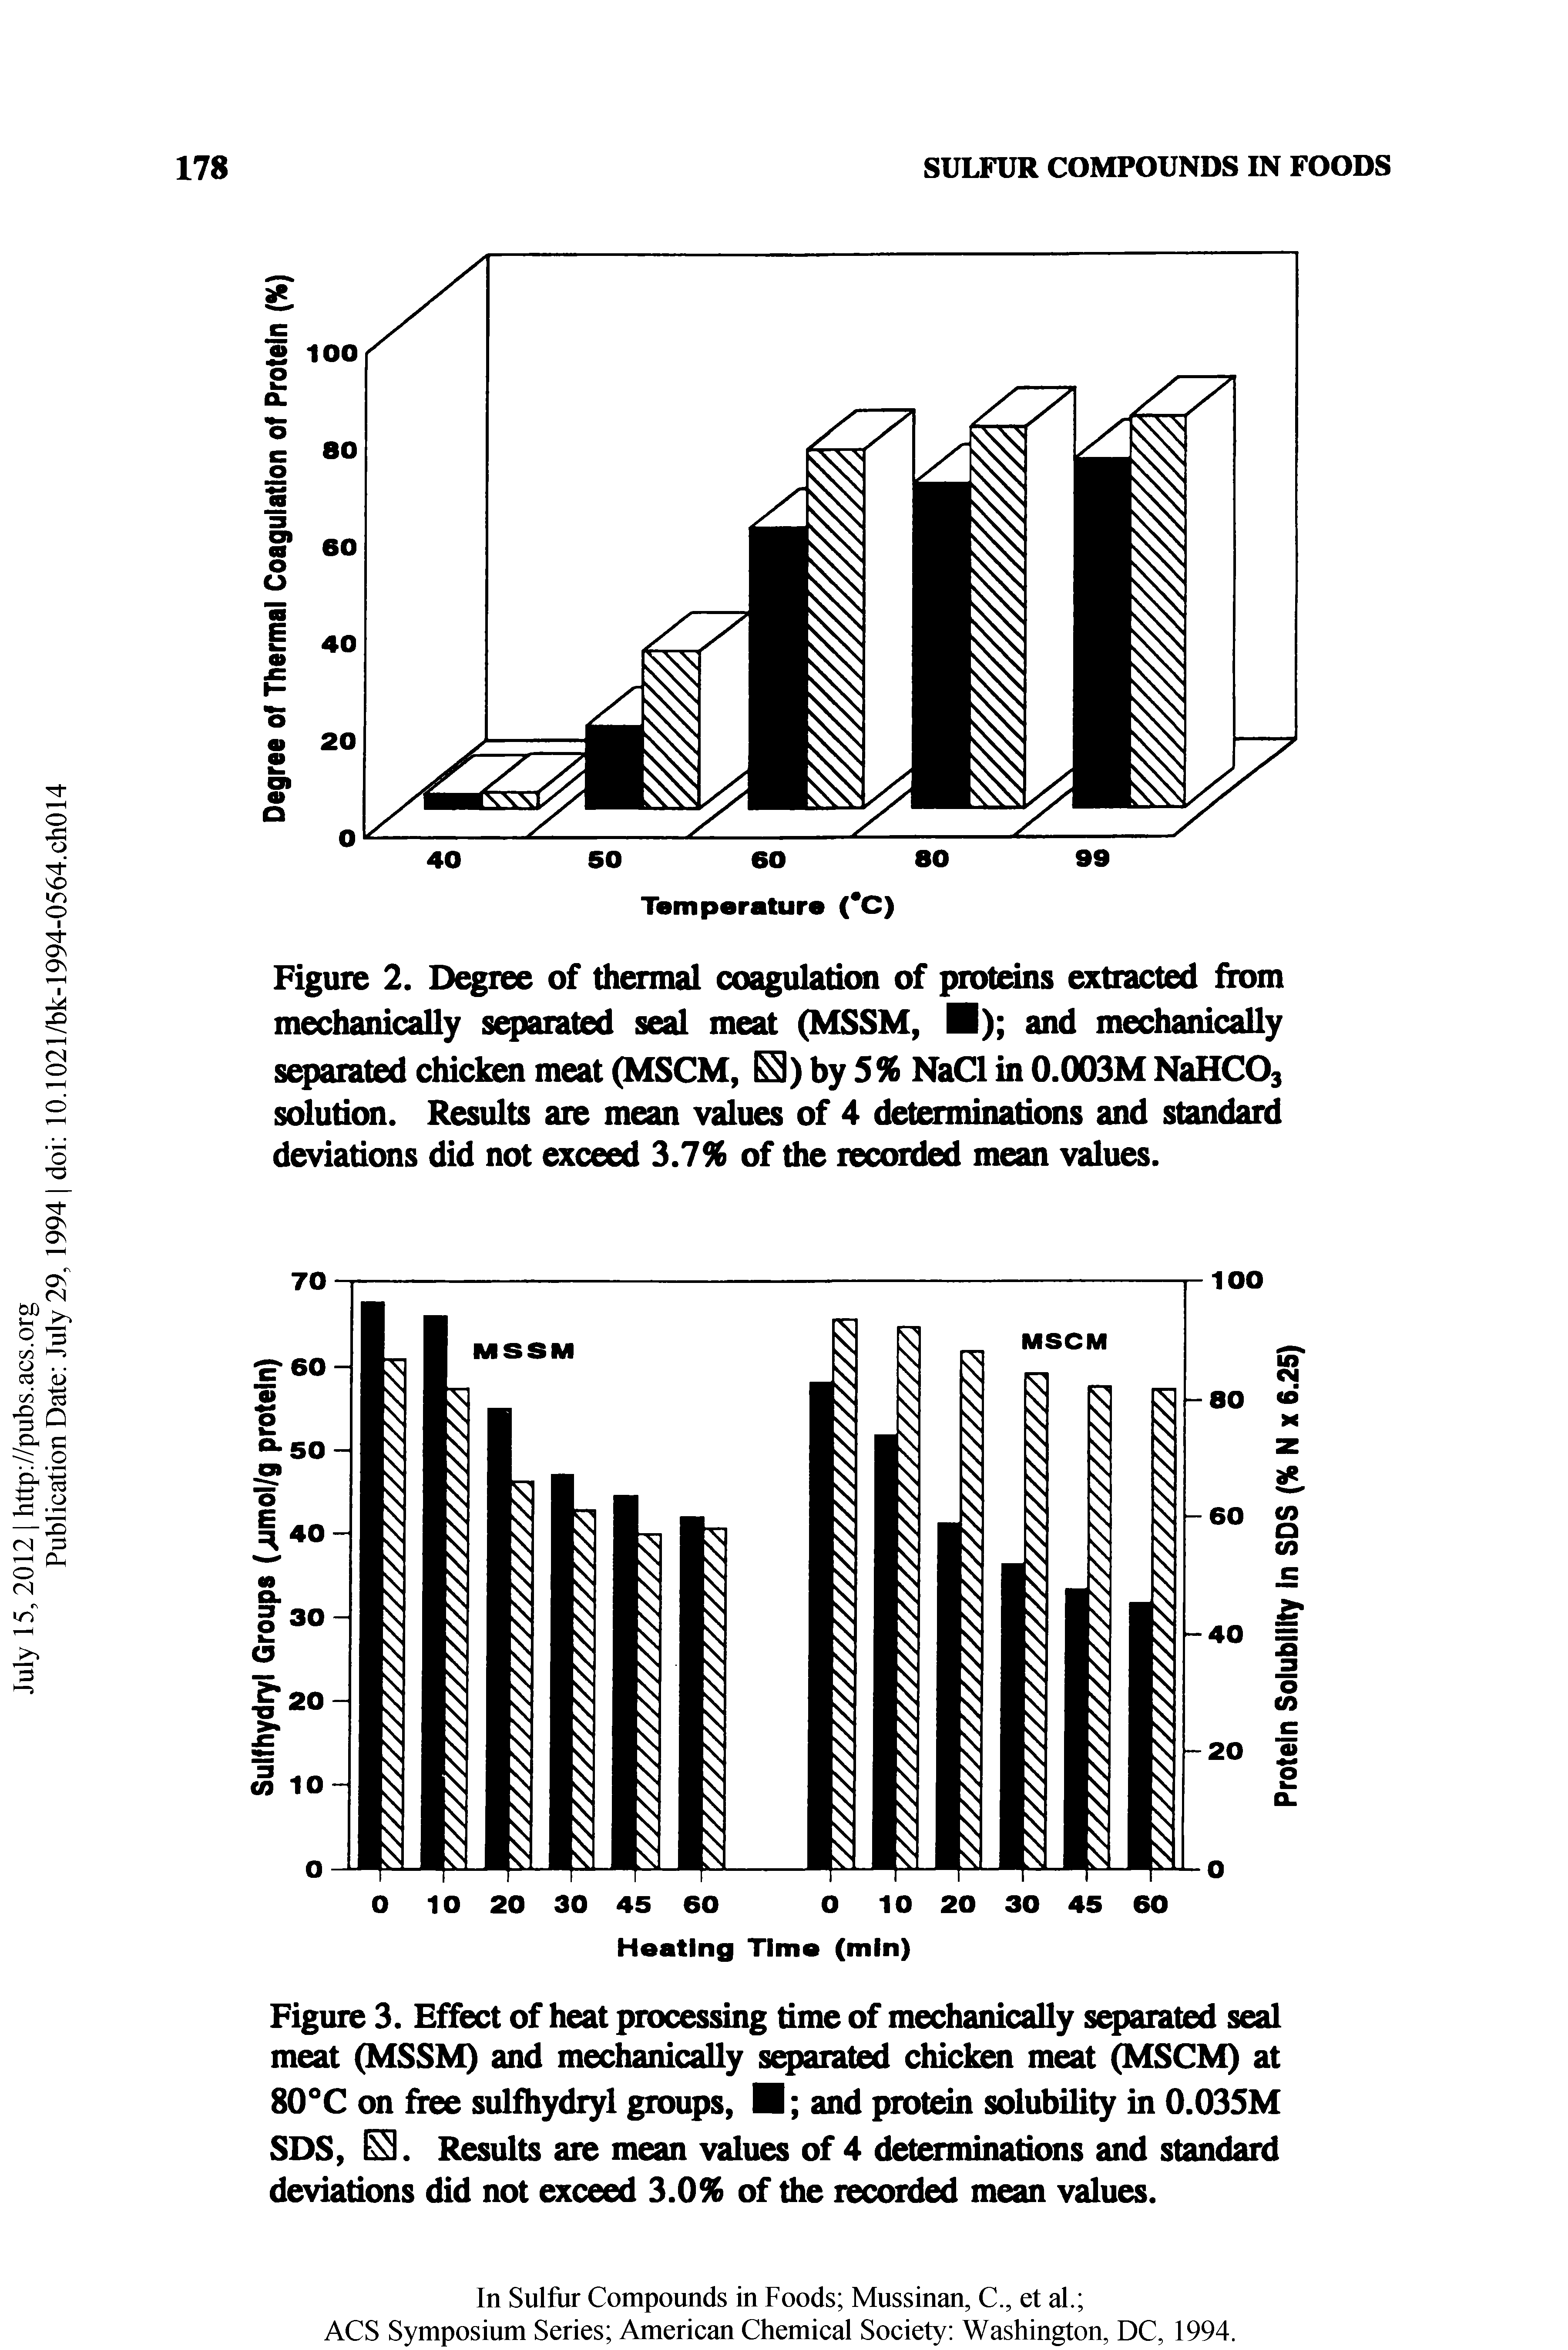 Figure 2. D iee of tiiennal coagulation of protons extracted firom mechanically separated seal meat (MSSM, H) and mechanically separated duckm meat (MSCM, by S% NaCl in 0.003M NaHC03 solution. Results are mean values of 4 detominations and standard deviations did not exceed 3.7% of the recmded mean values.